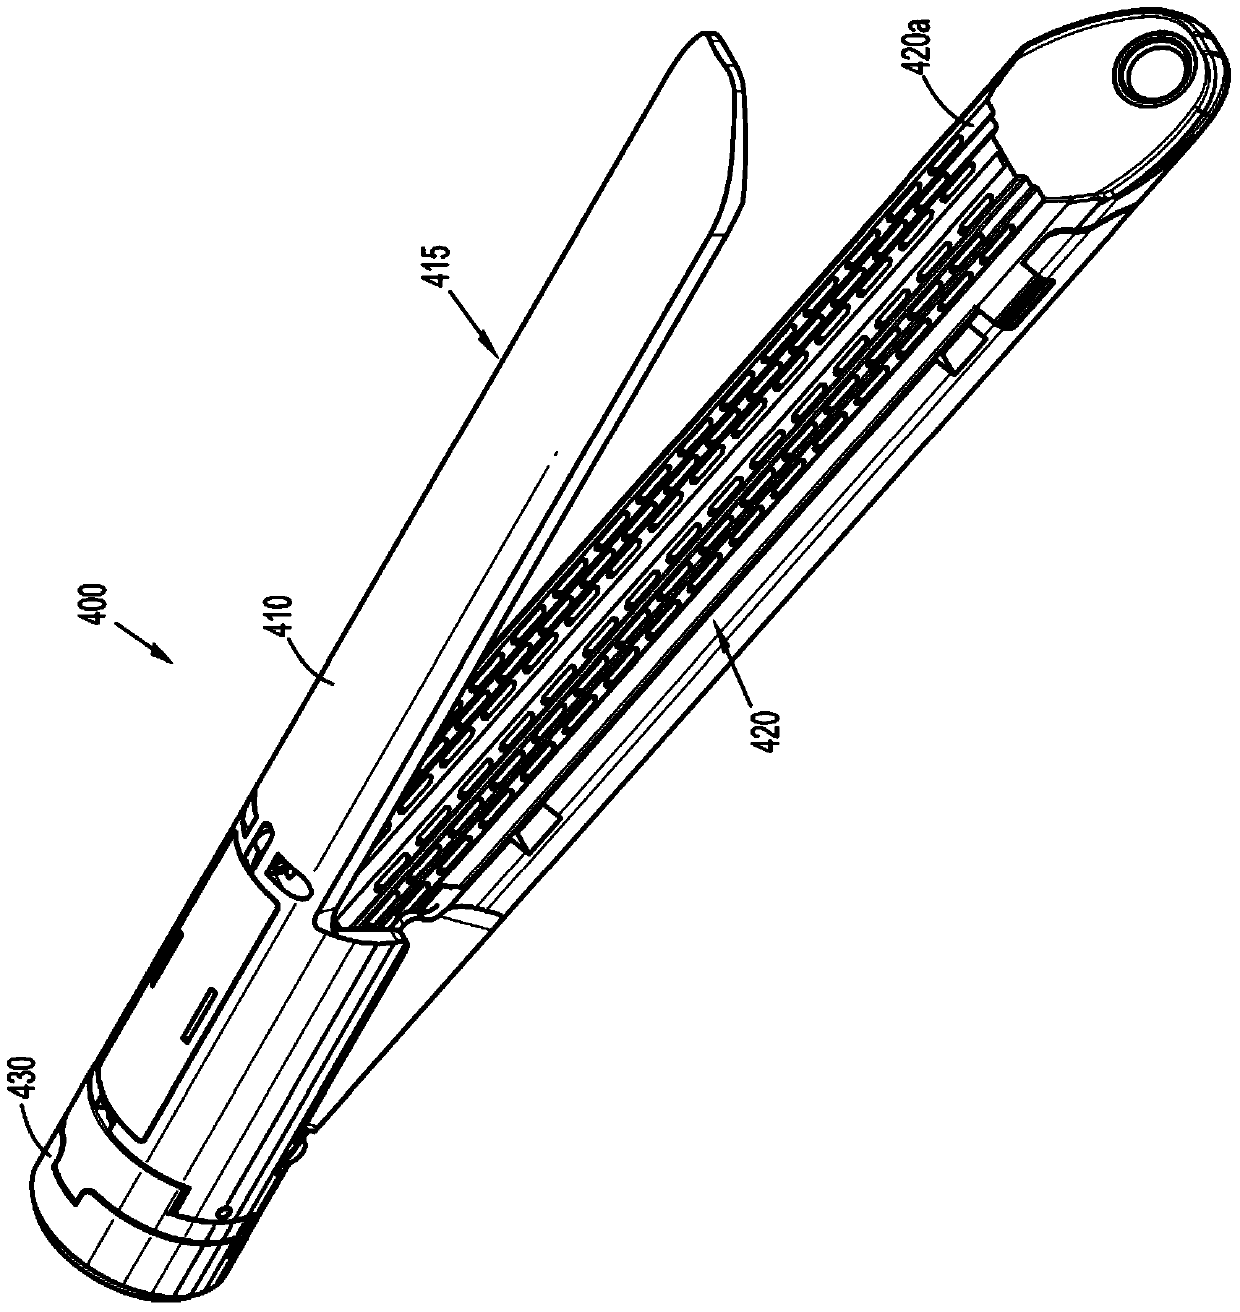 Composite drive beam for surgical anastomosis